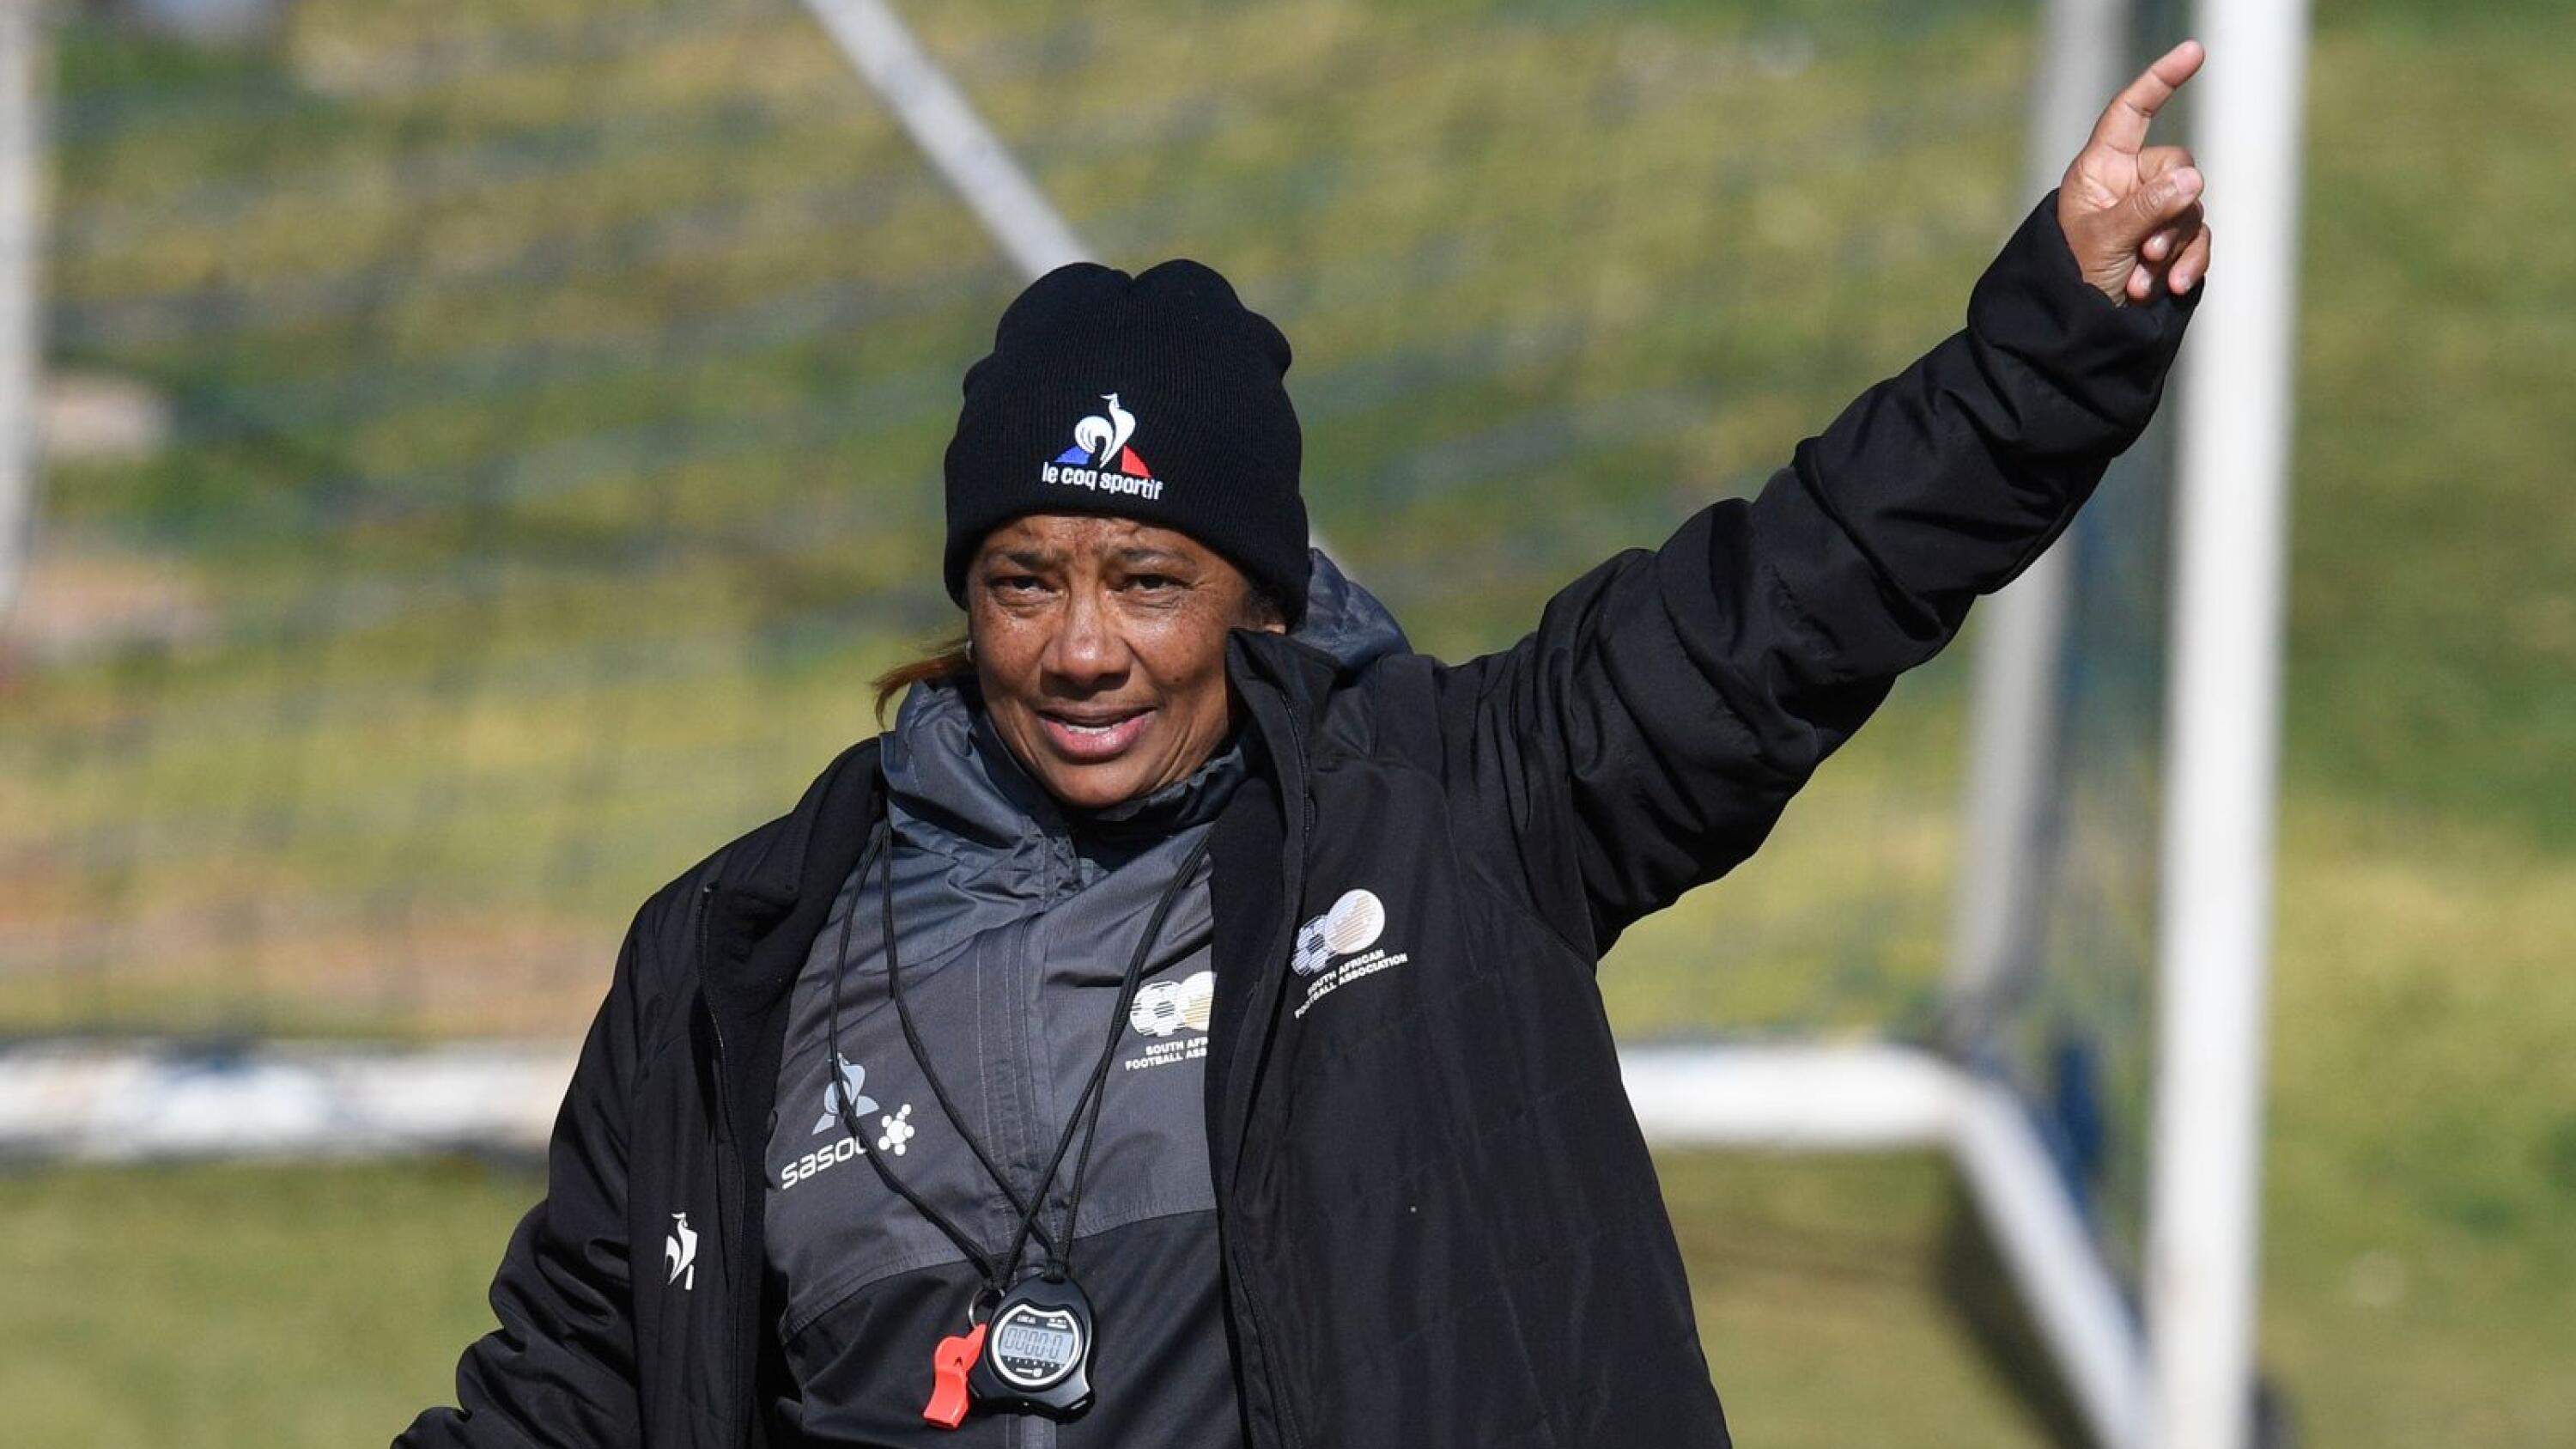 Banyana Banyana coach Desiree Ellis gives orders during a training session at Highlands Park in Johannesburg on Thursday